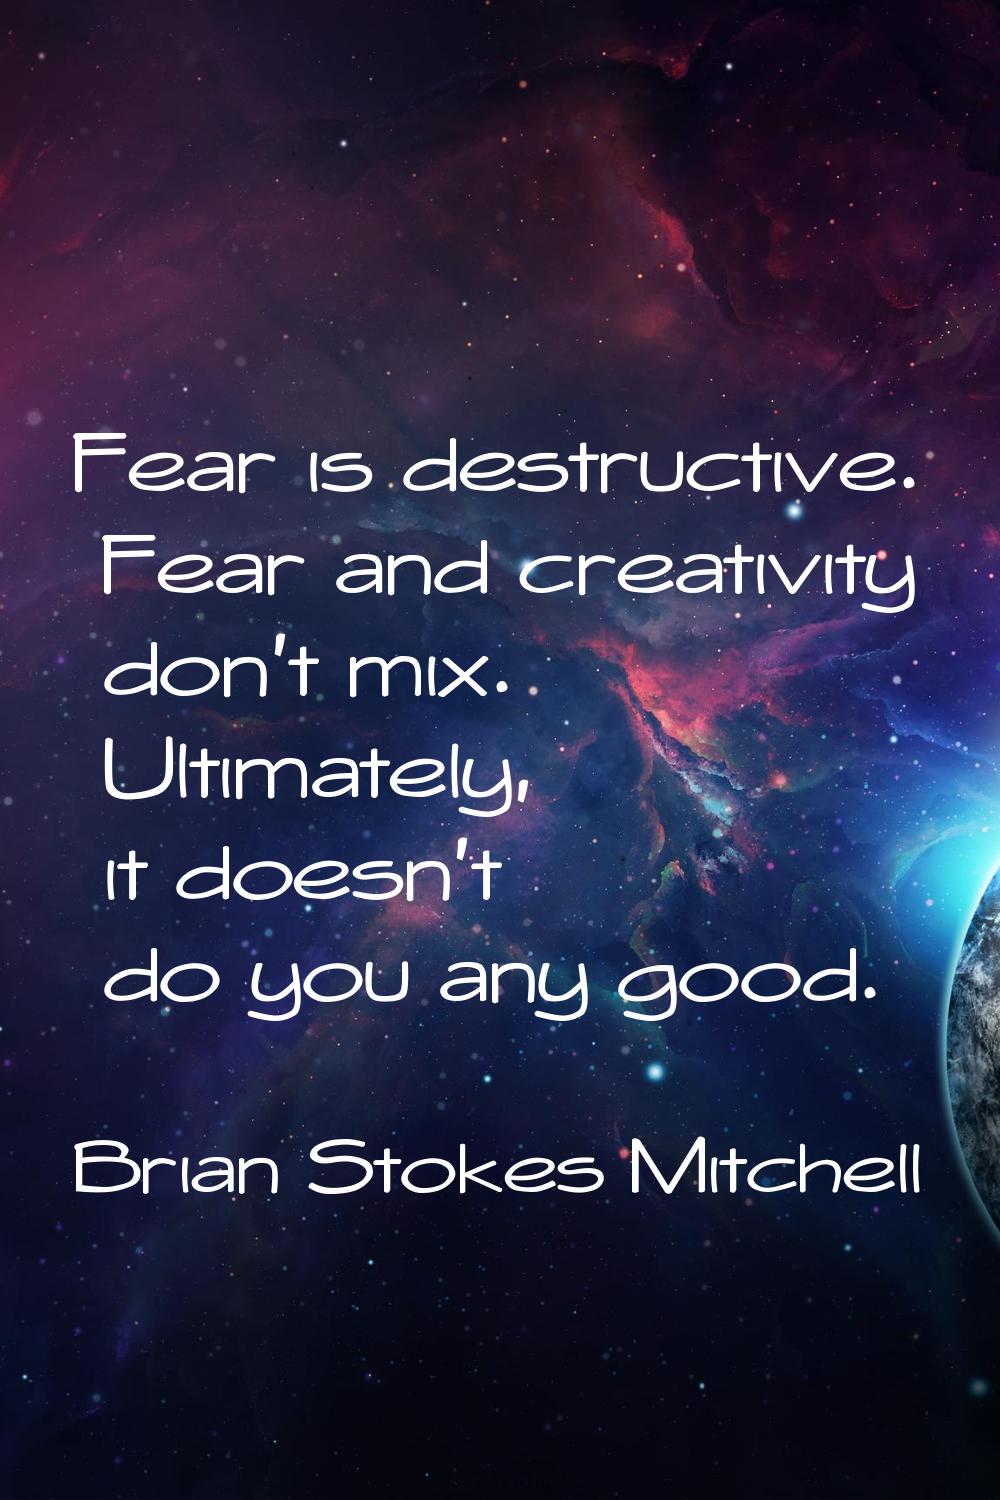 Fear is destructive. Fear and creativity don't mix. Ultimately, it doesn't do you any good.